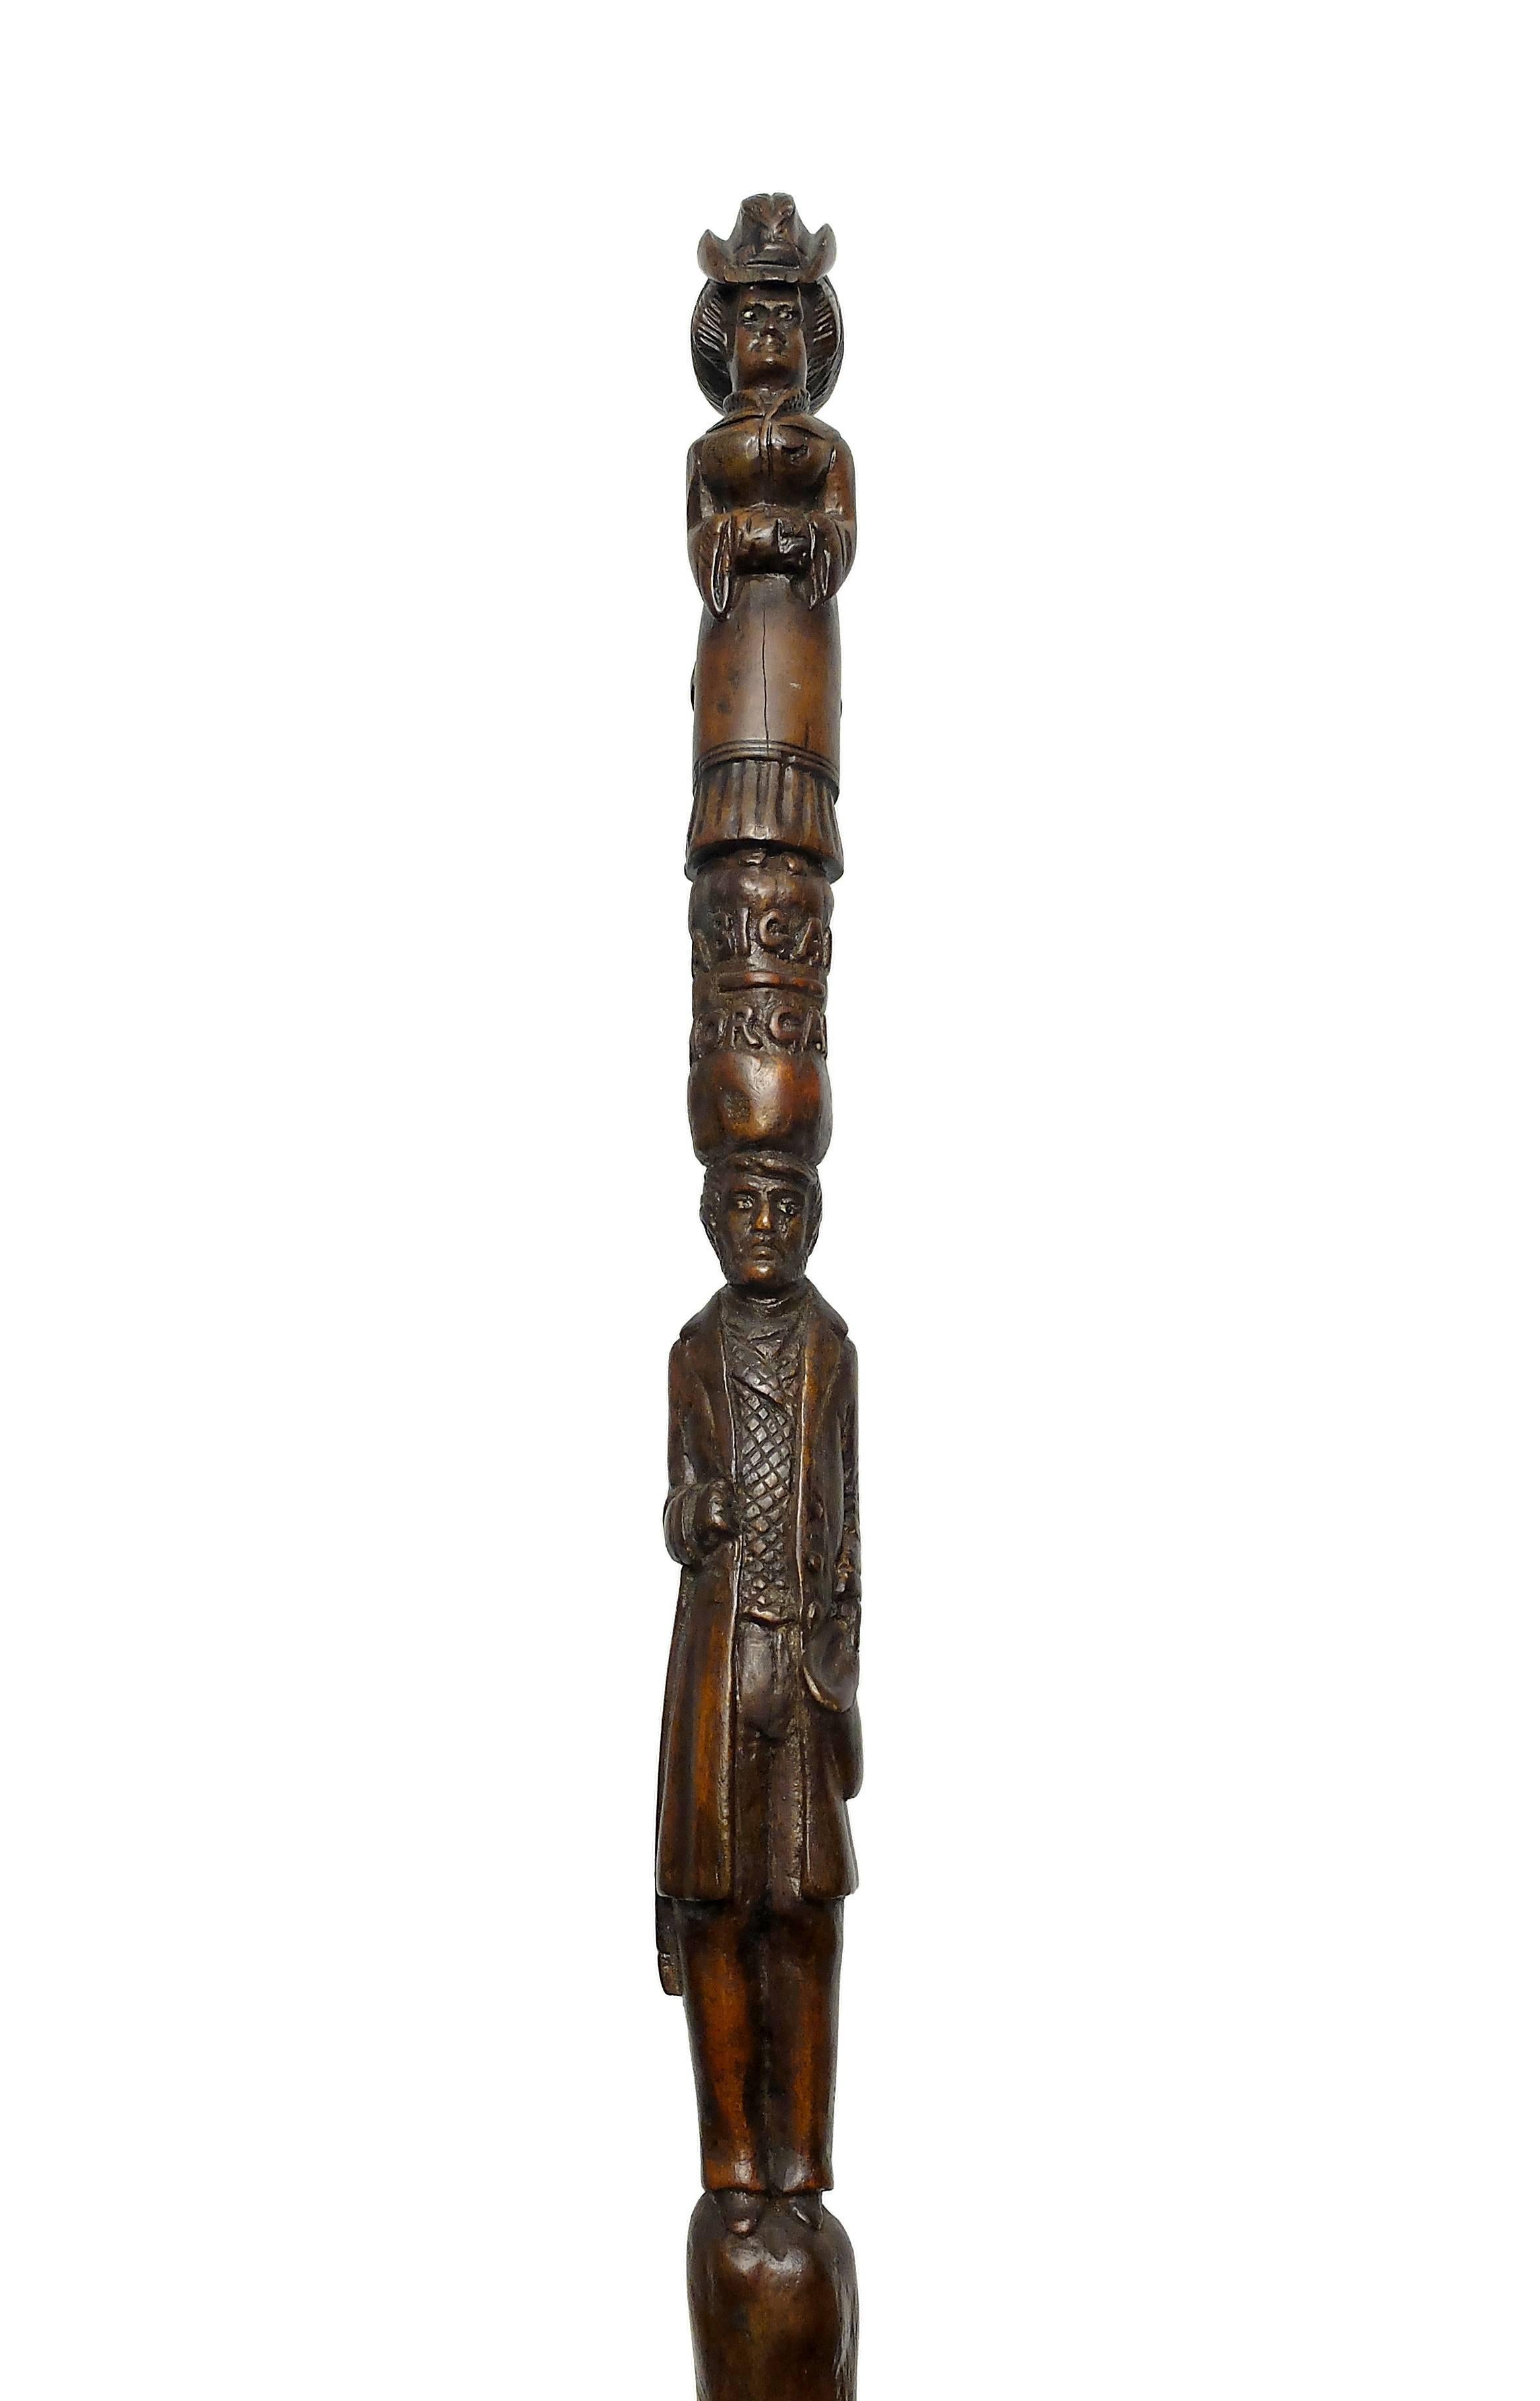 An extremely rare English Folk Art cane, carved in a single piece of fruitwood, superb patina and superb quality of the details. The cane tells us that Ms.Abigale and Mr. Morgan got married in 6/6/1868, both of them elegantly and carefully dressed,